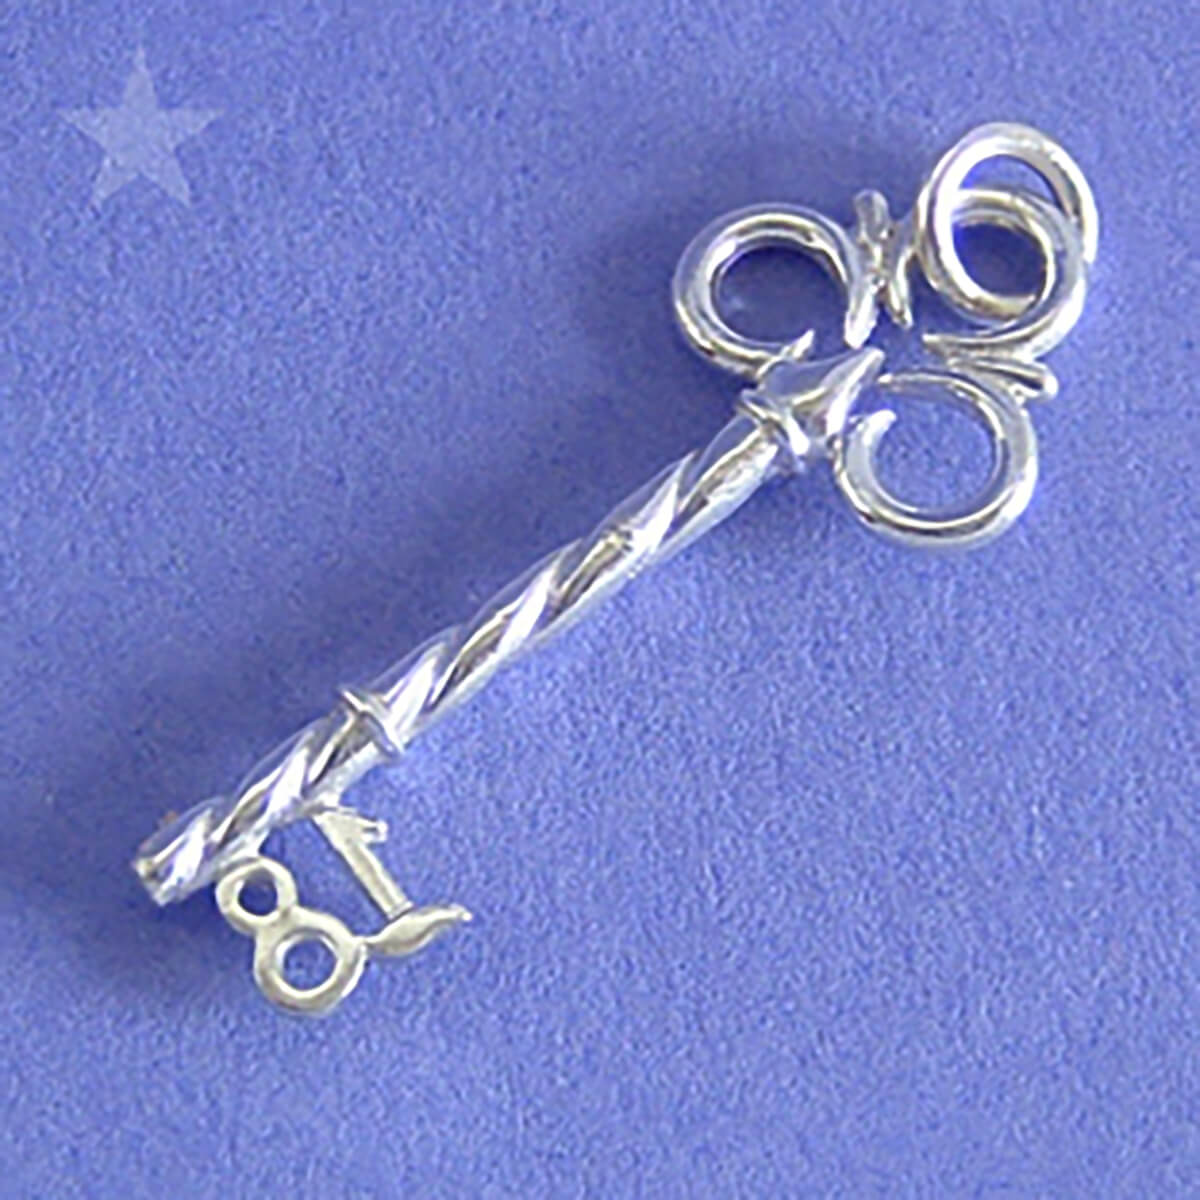 18th Birthday Key Charm Sterling Silver or Gold Anniversary Pendant